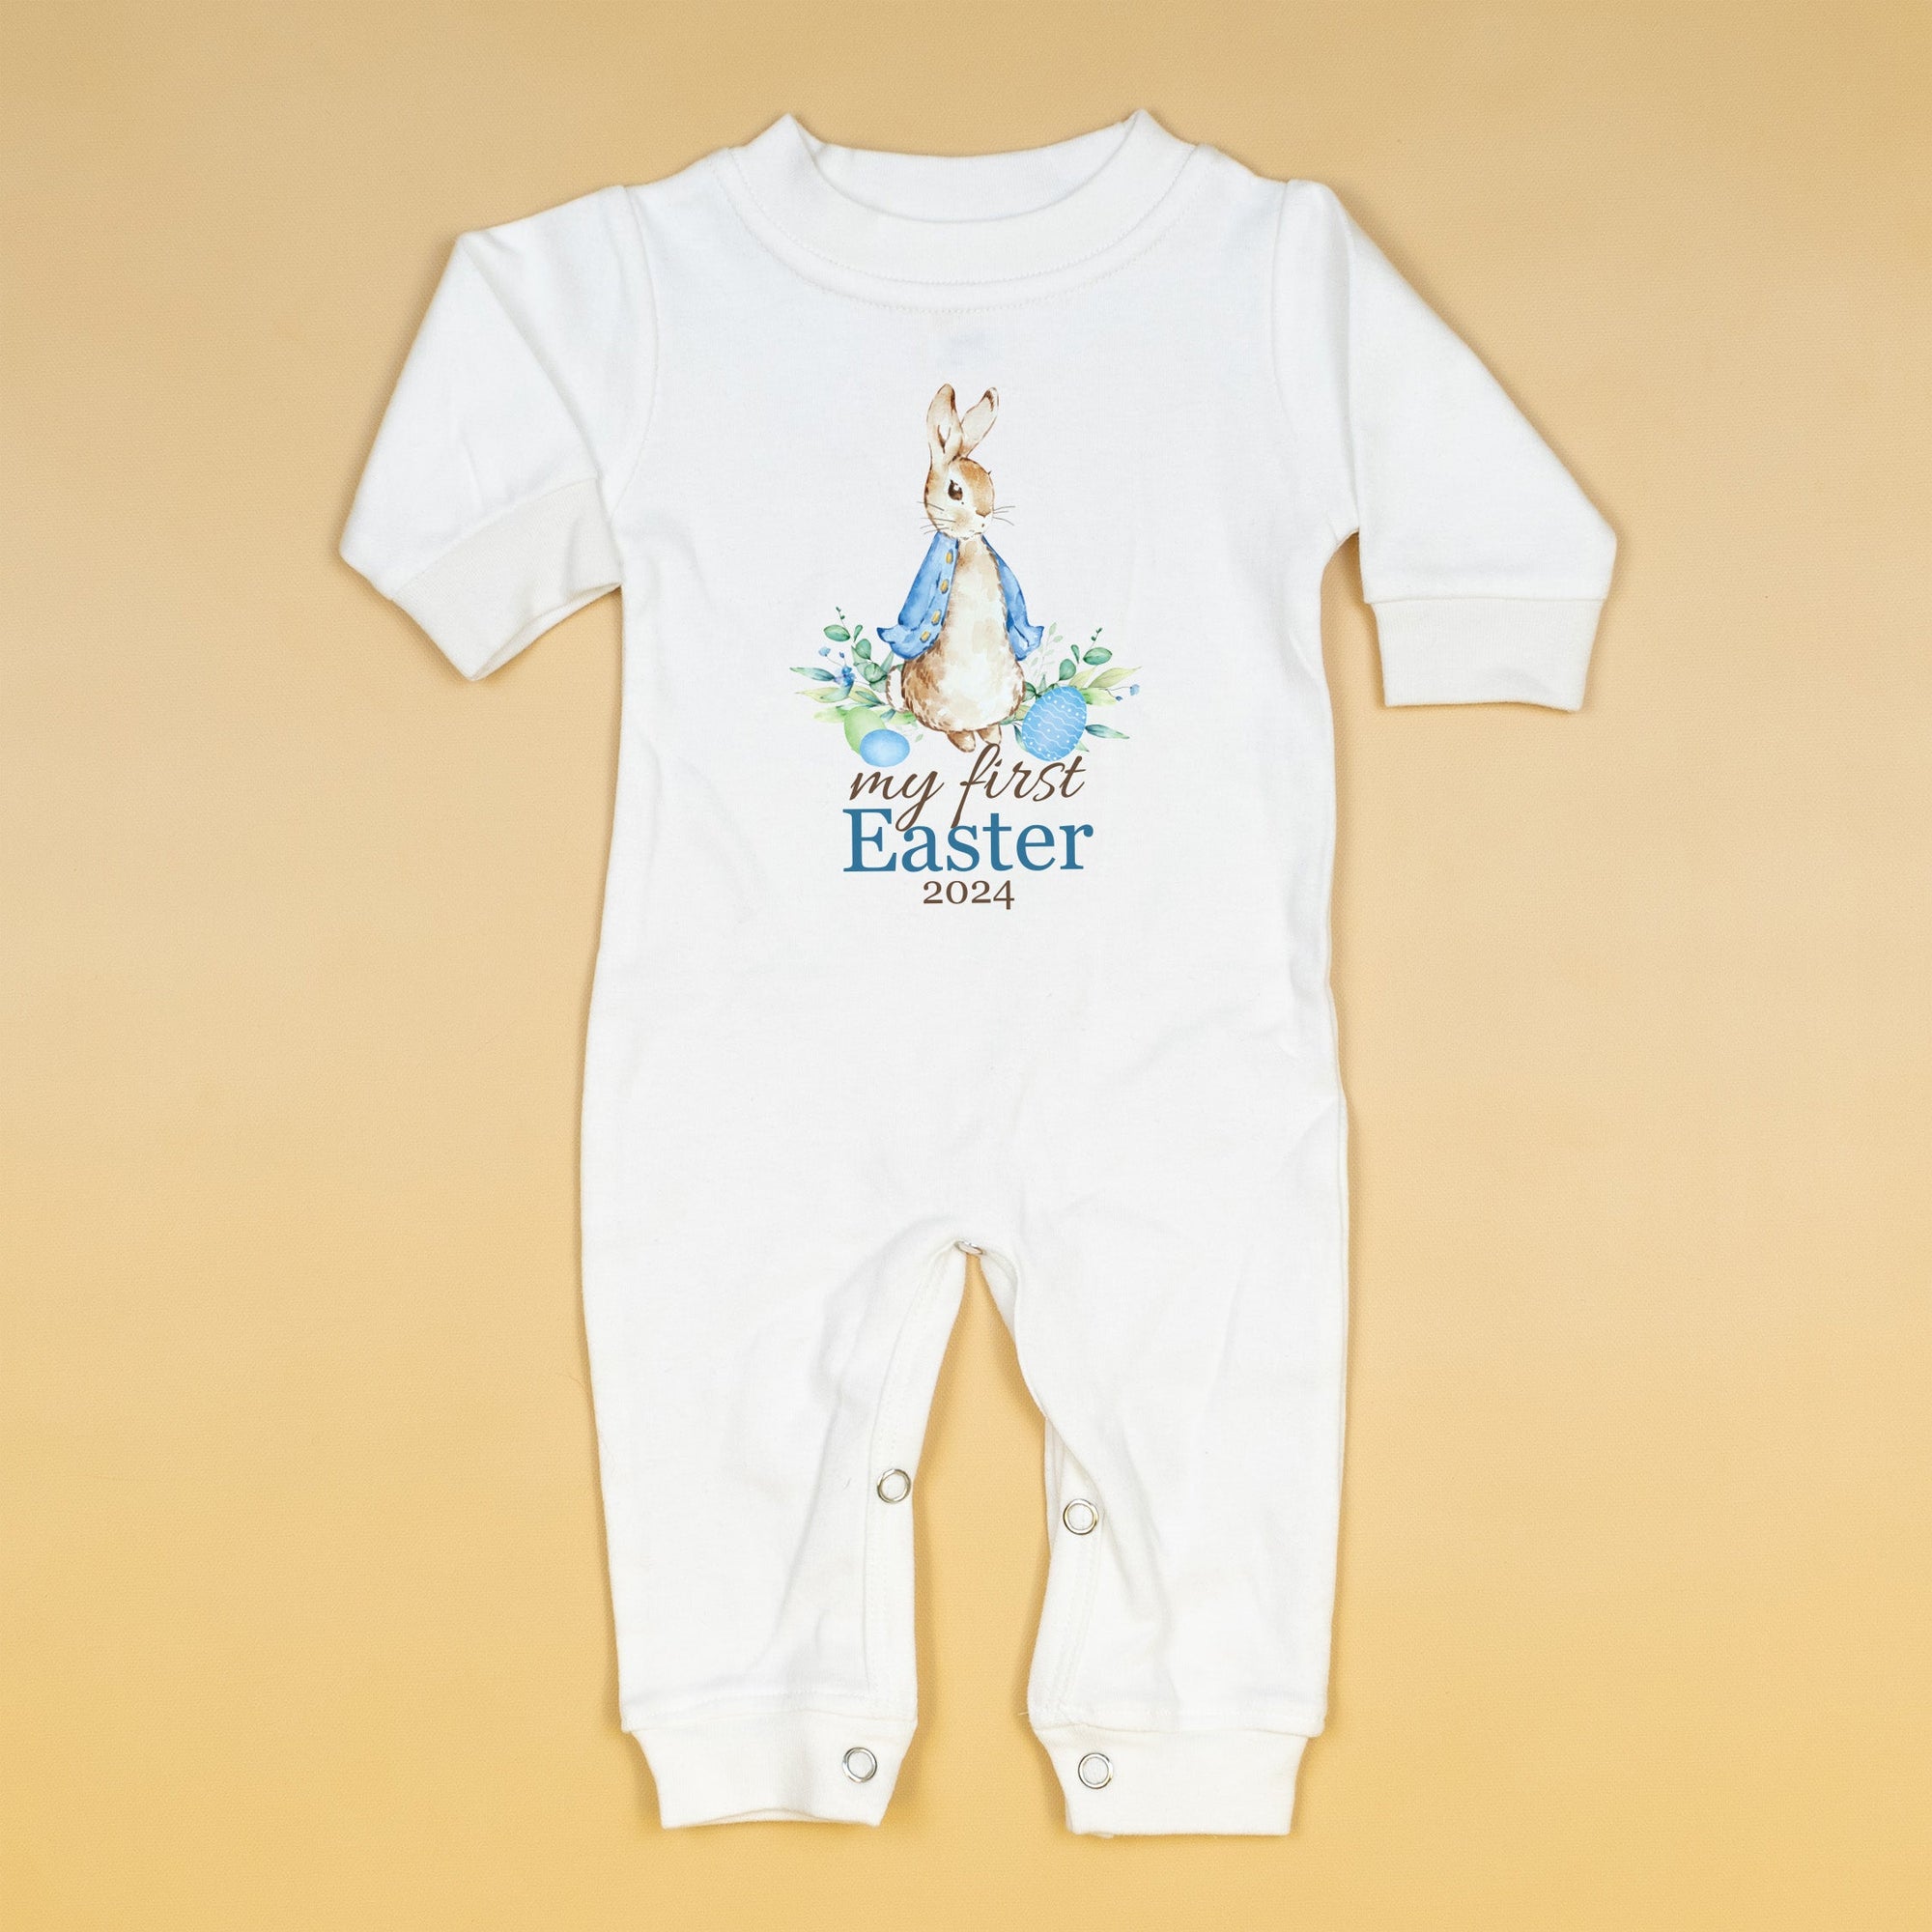 Cuddle Sleep Dream My First Easter w/ Blue Cottontail Rabbit | White Long Romper